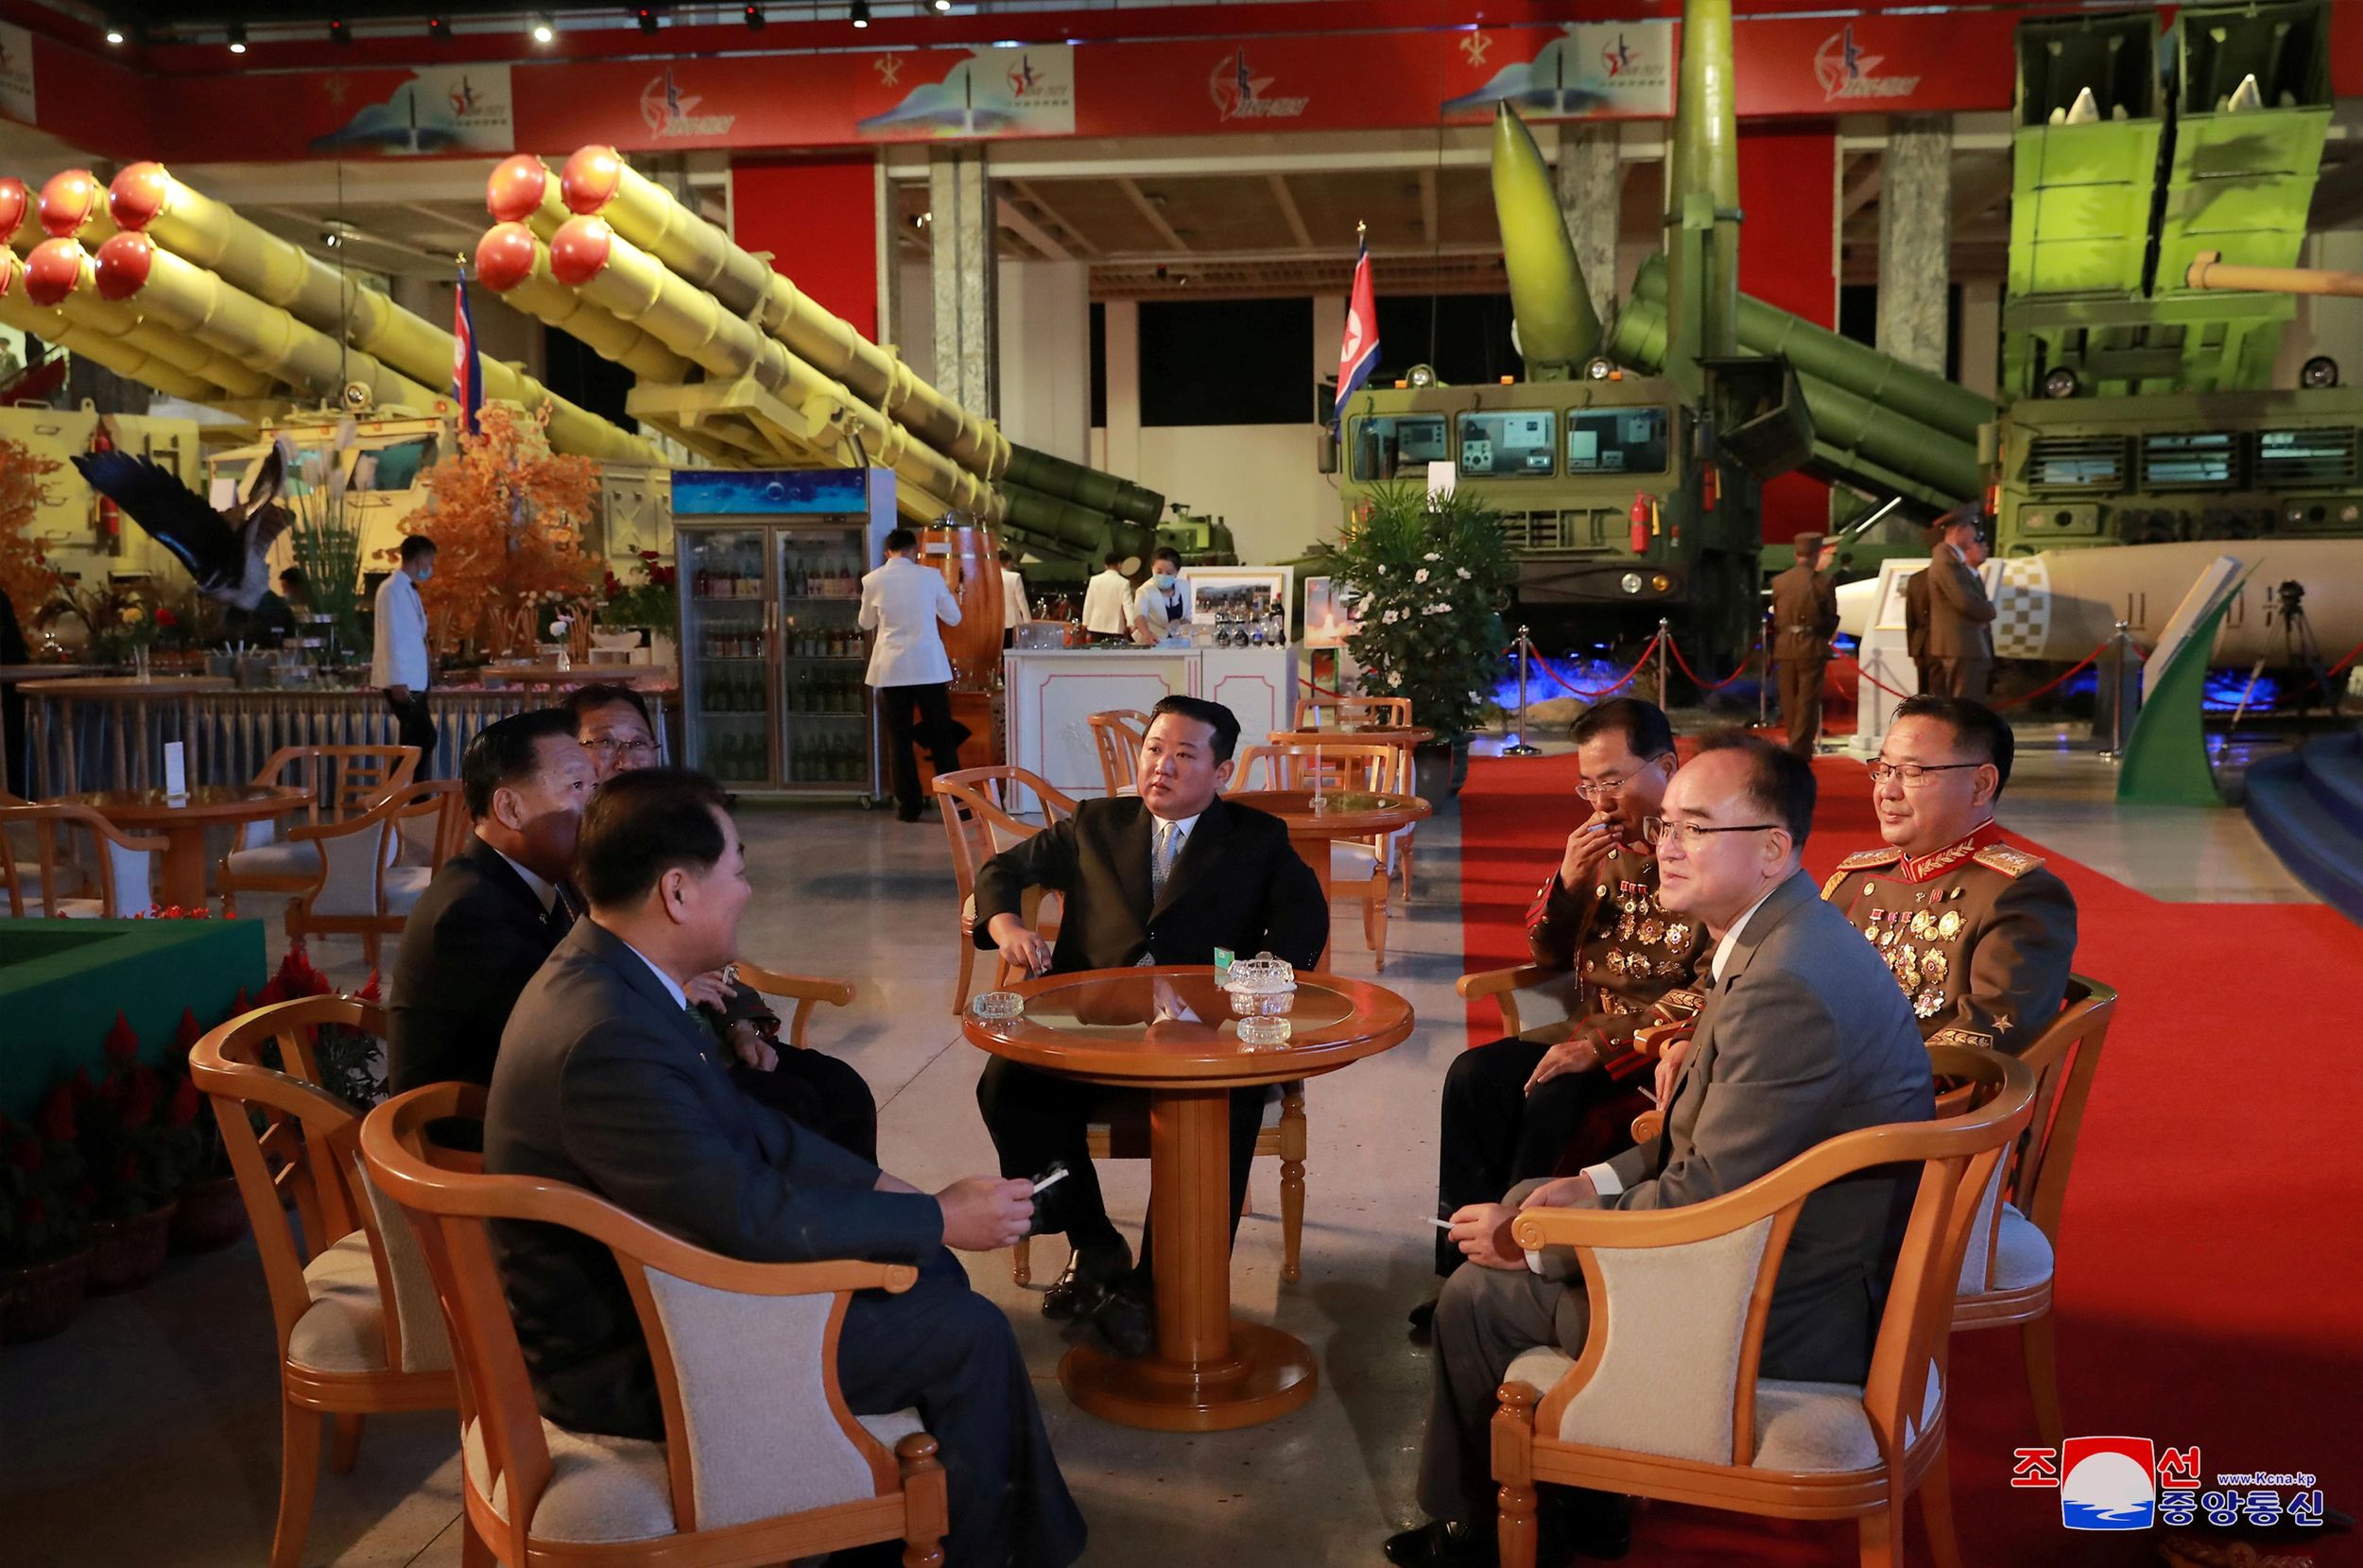 North Korea's leader Kim Jong Un attends the Defence Development Exhibition, in Pyongyang, North Korea, in this undated photo released on October 12, 2021 by North Korea's Korean Central News Agency 